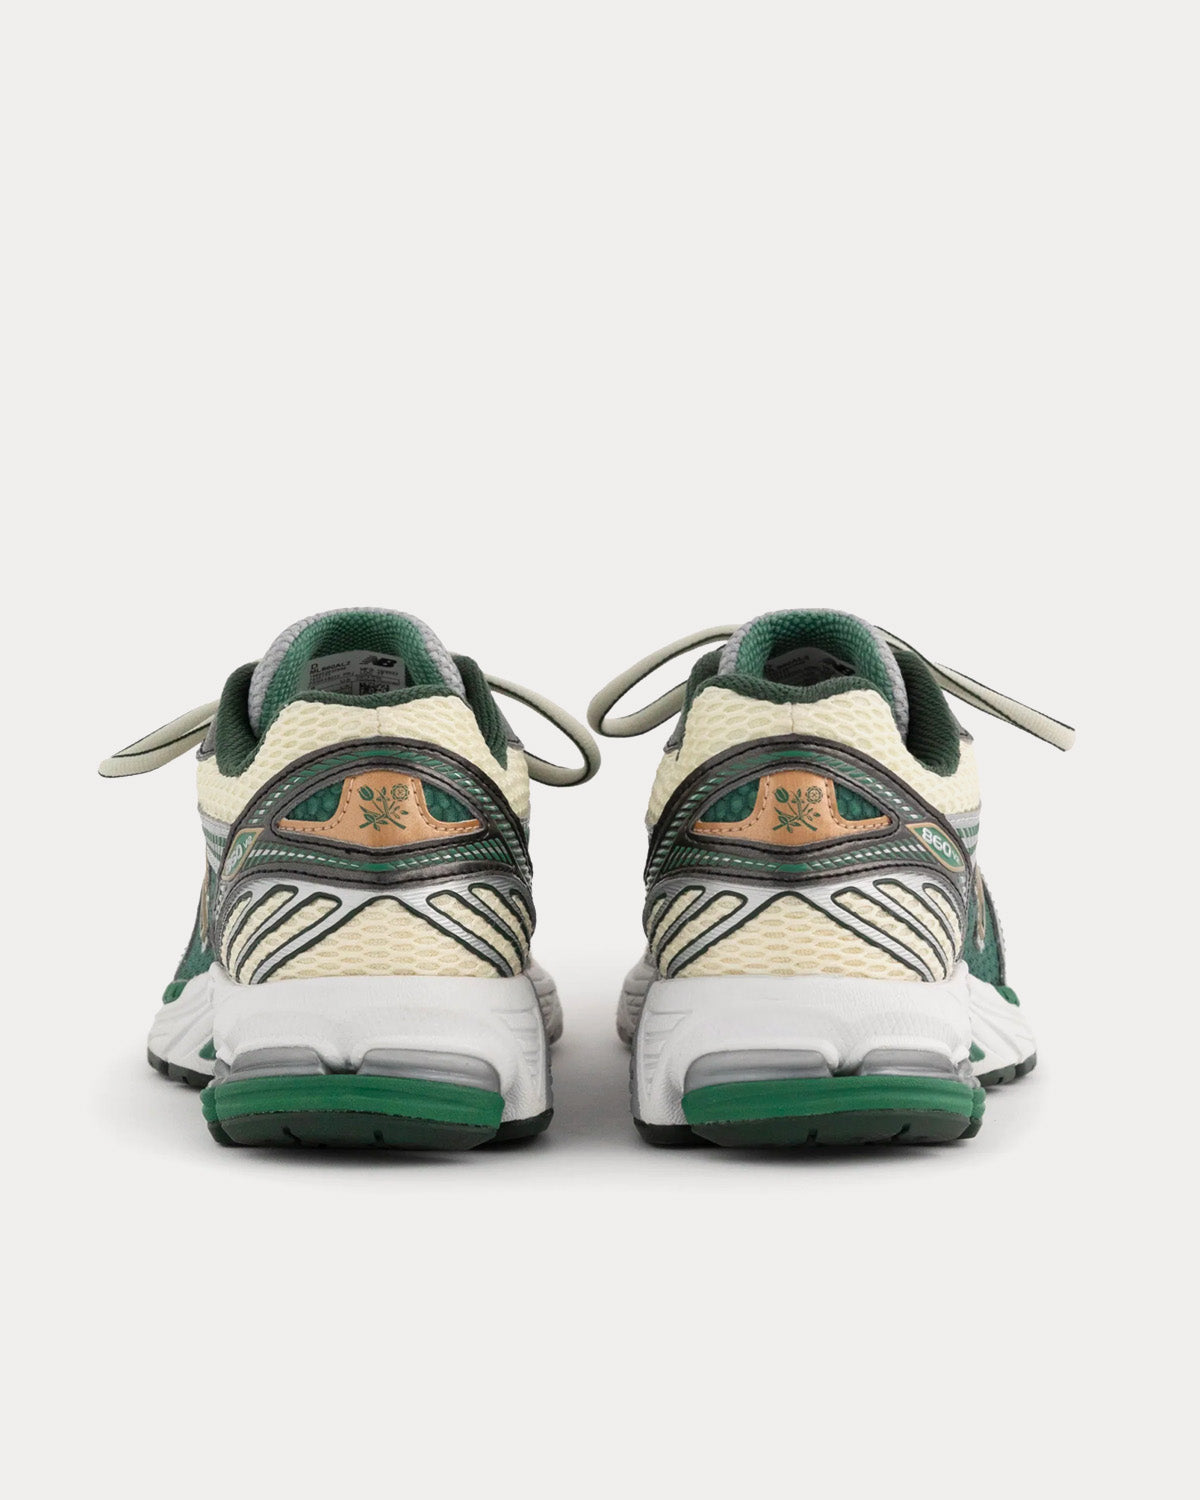 New Balance x Aime Leon Dore - 860v2 Green Low Top Sneakers